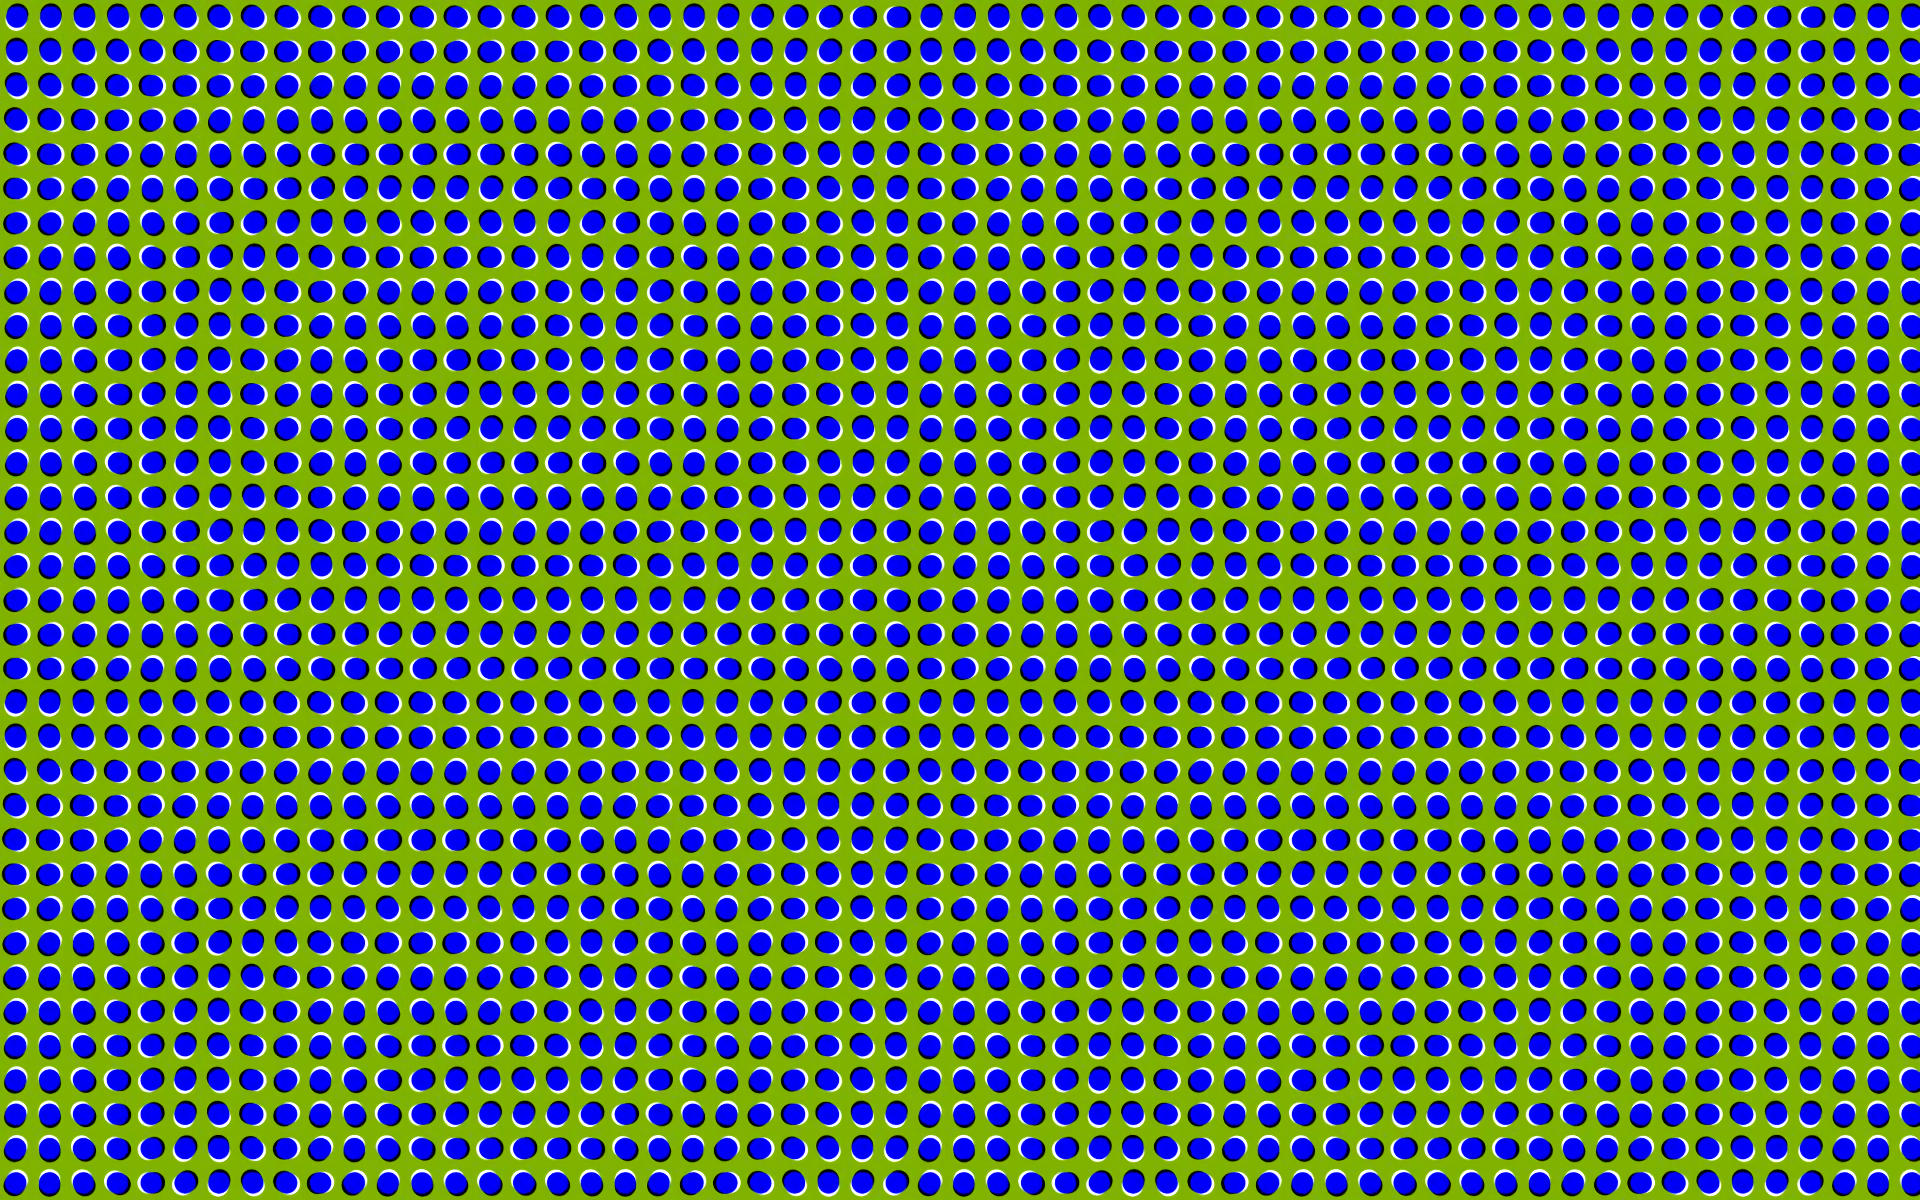 Abstract pattern of optical illusion dots